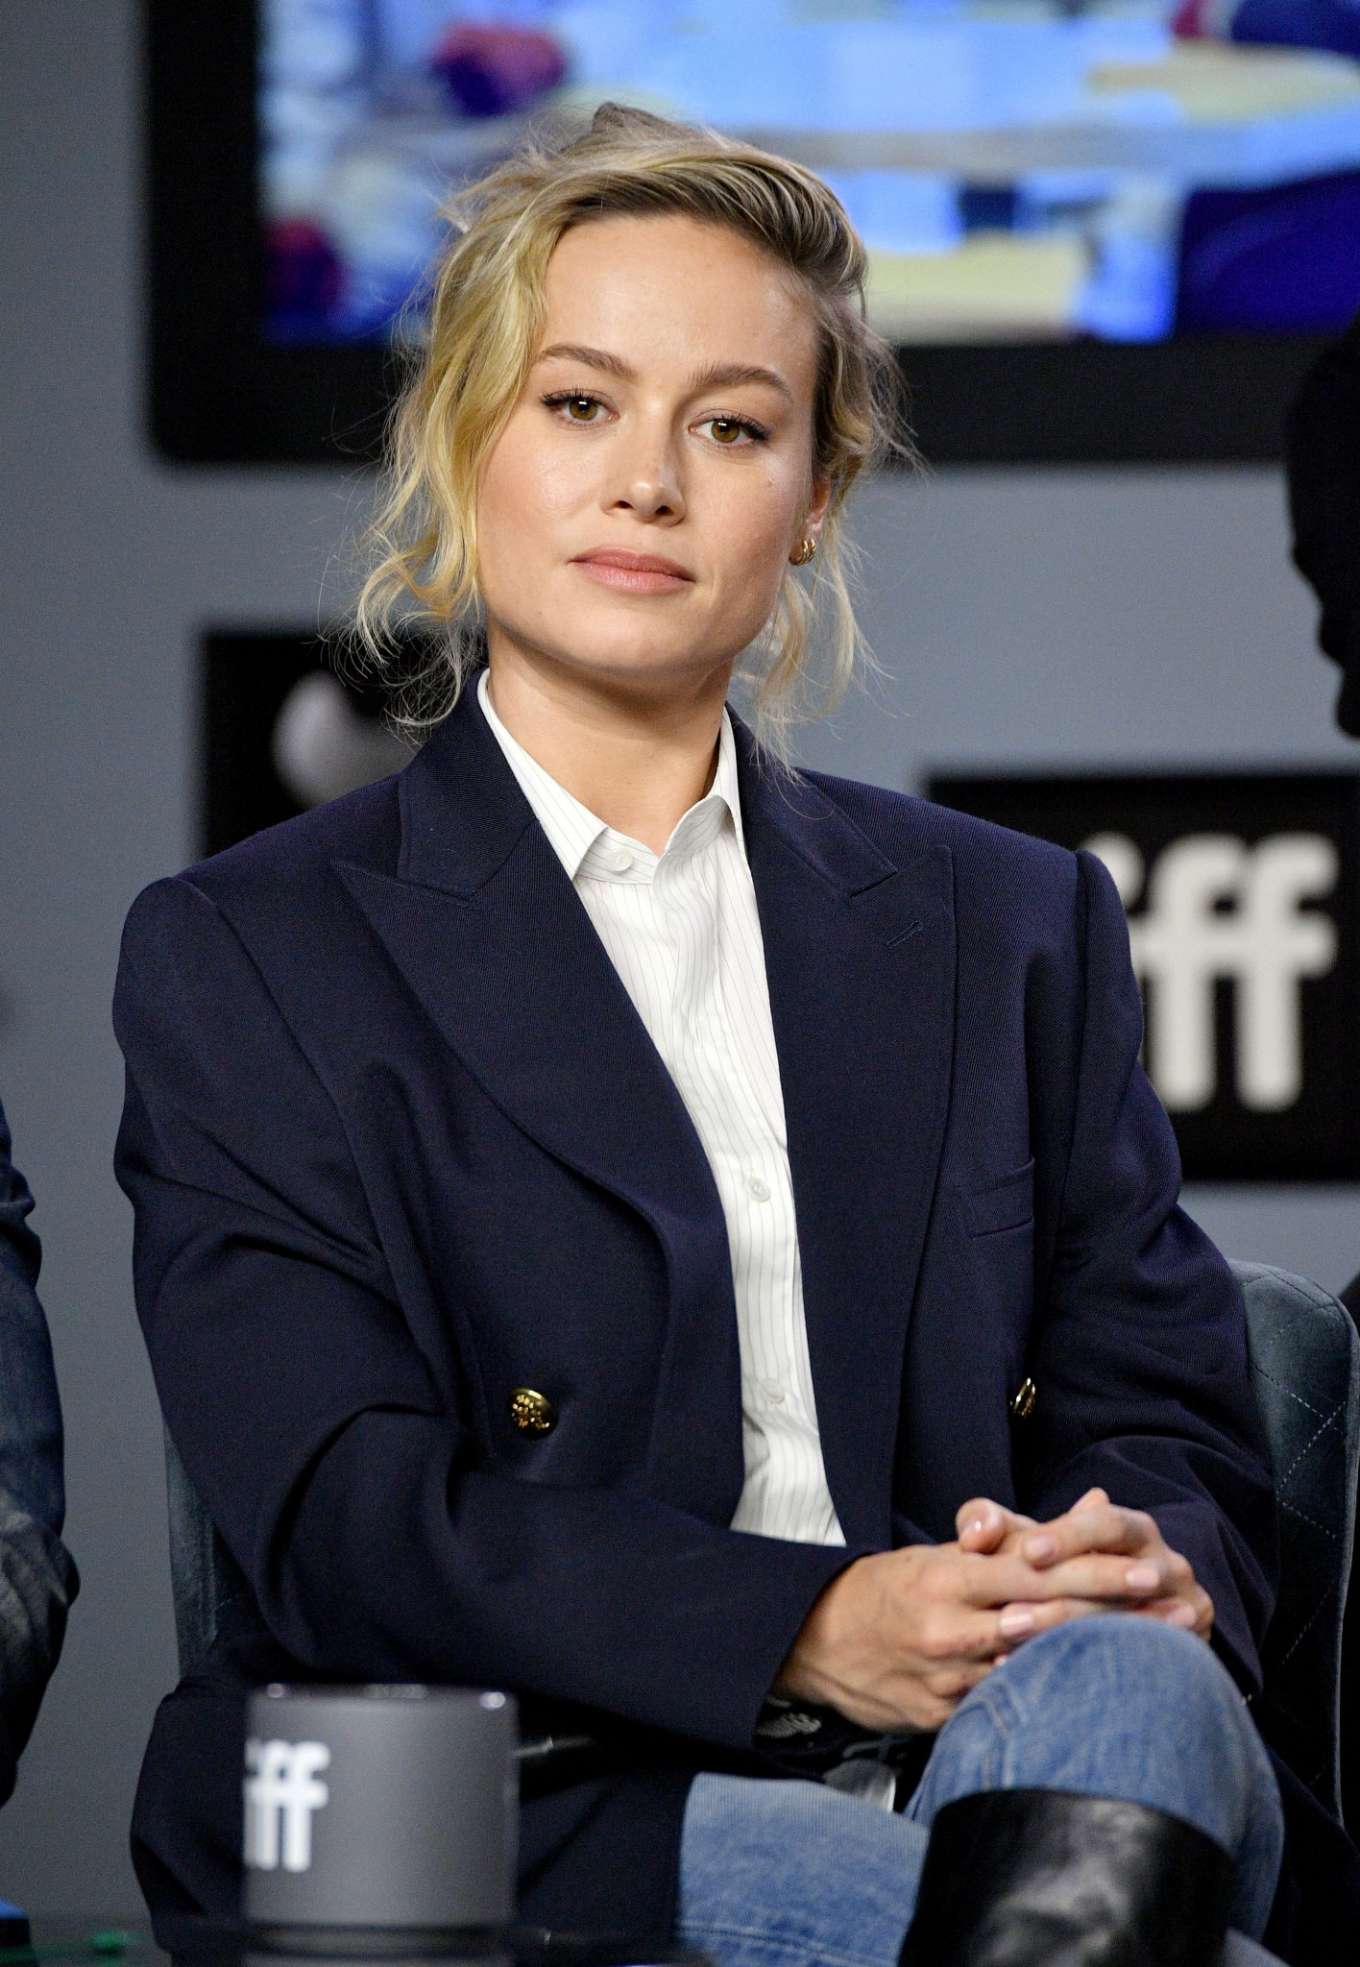 Brie Larson - 'Just Mercy' press conference during the 2019 Toronto International Film Festival